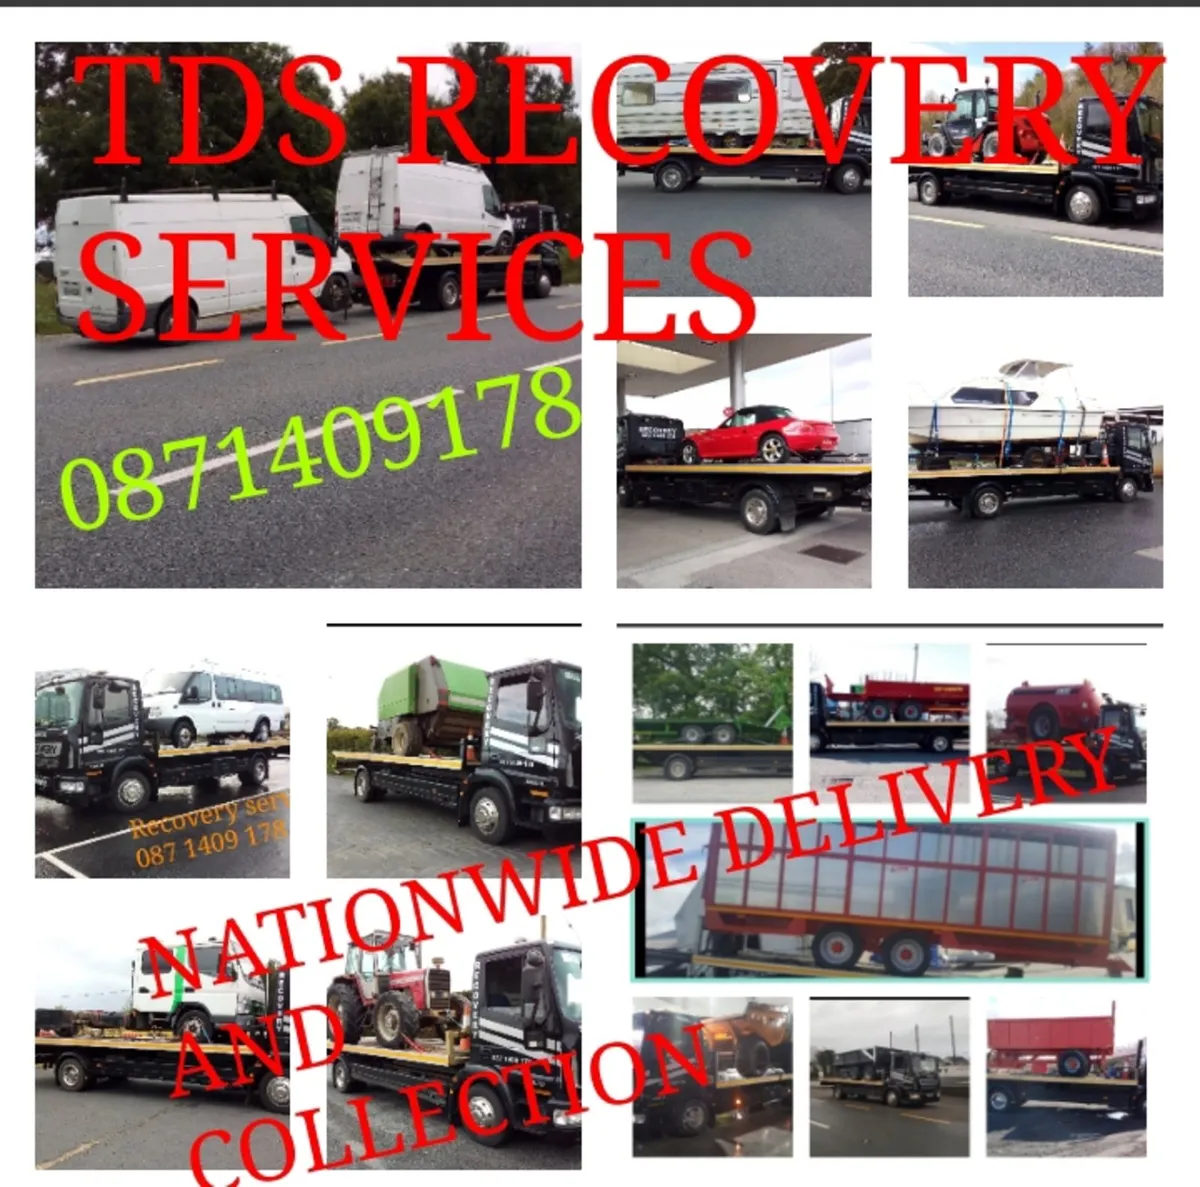 TDS Recovery and Transport services 087 1409 178 - Image 1